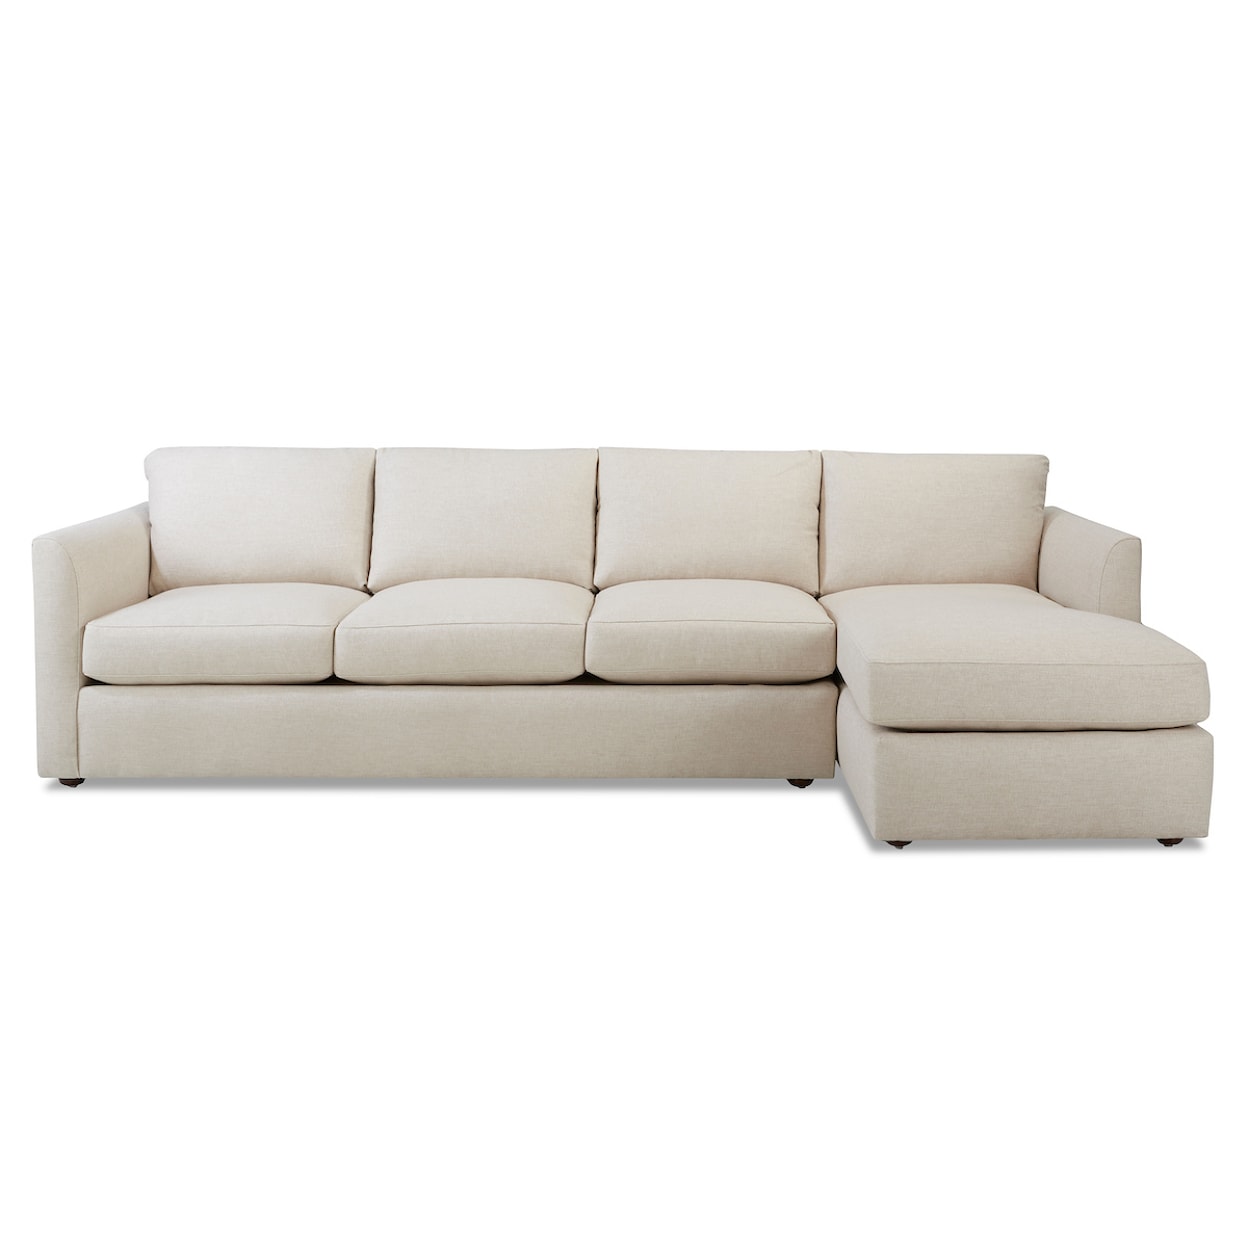 Klaussner Alamitos 2-Piece Sectional Sofa w/ RAF Chaise